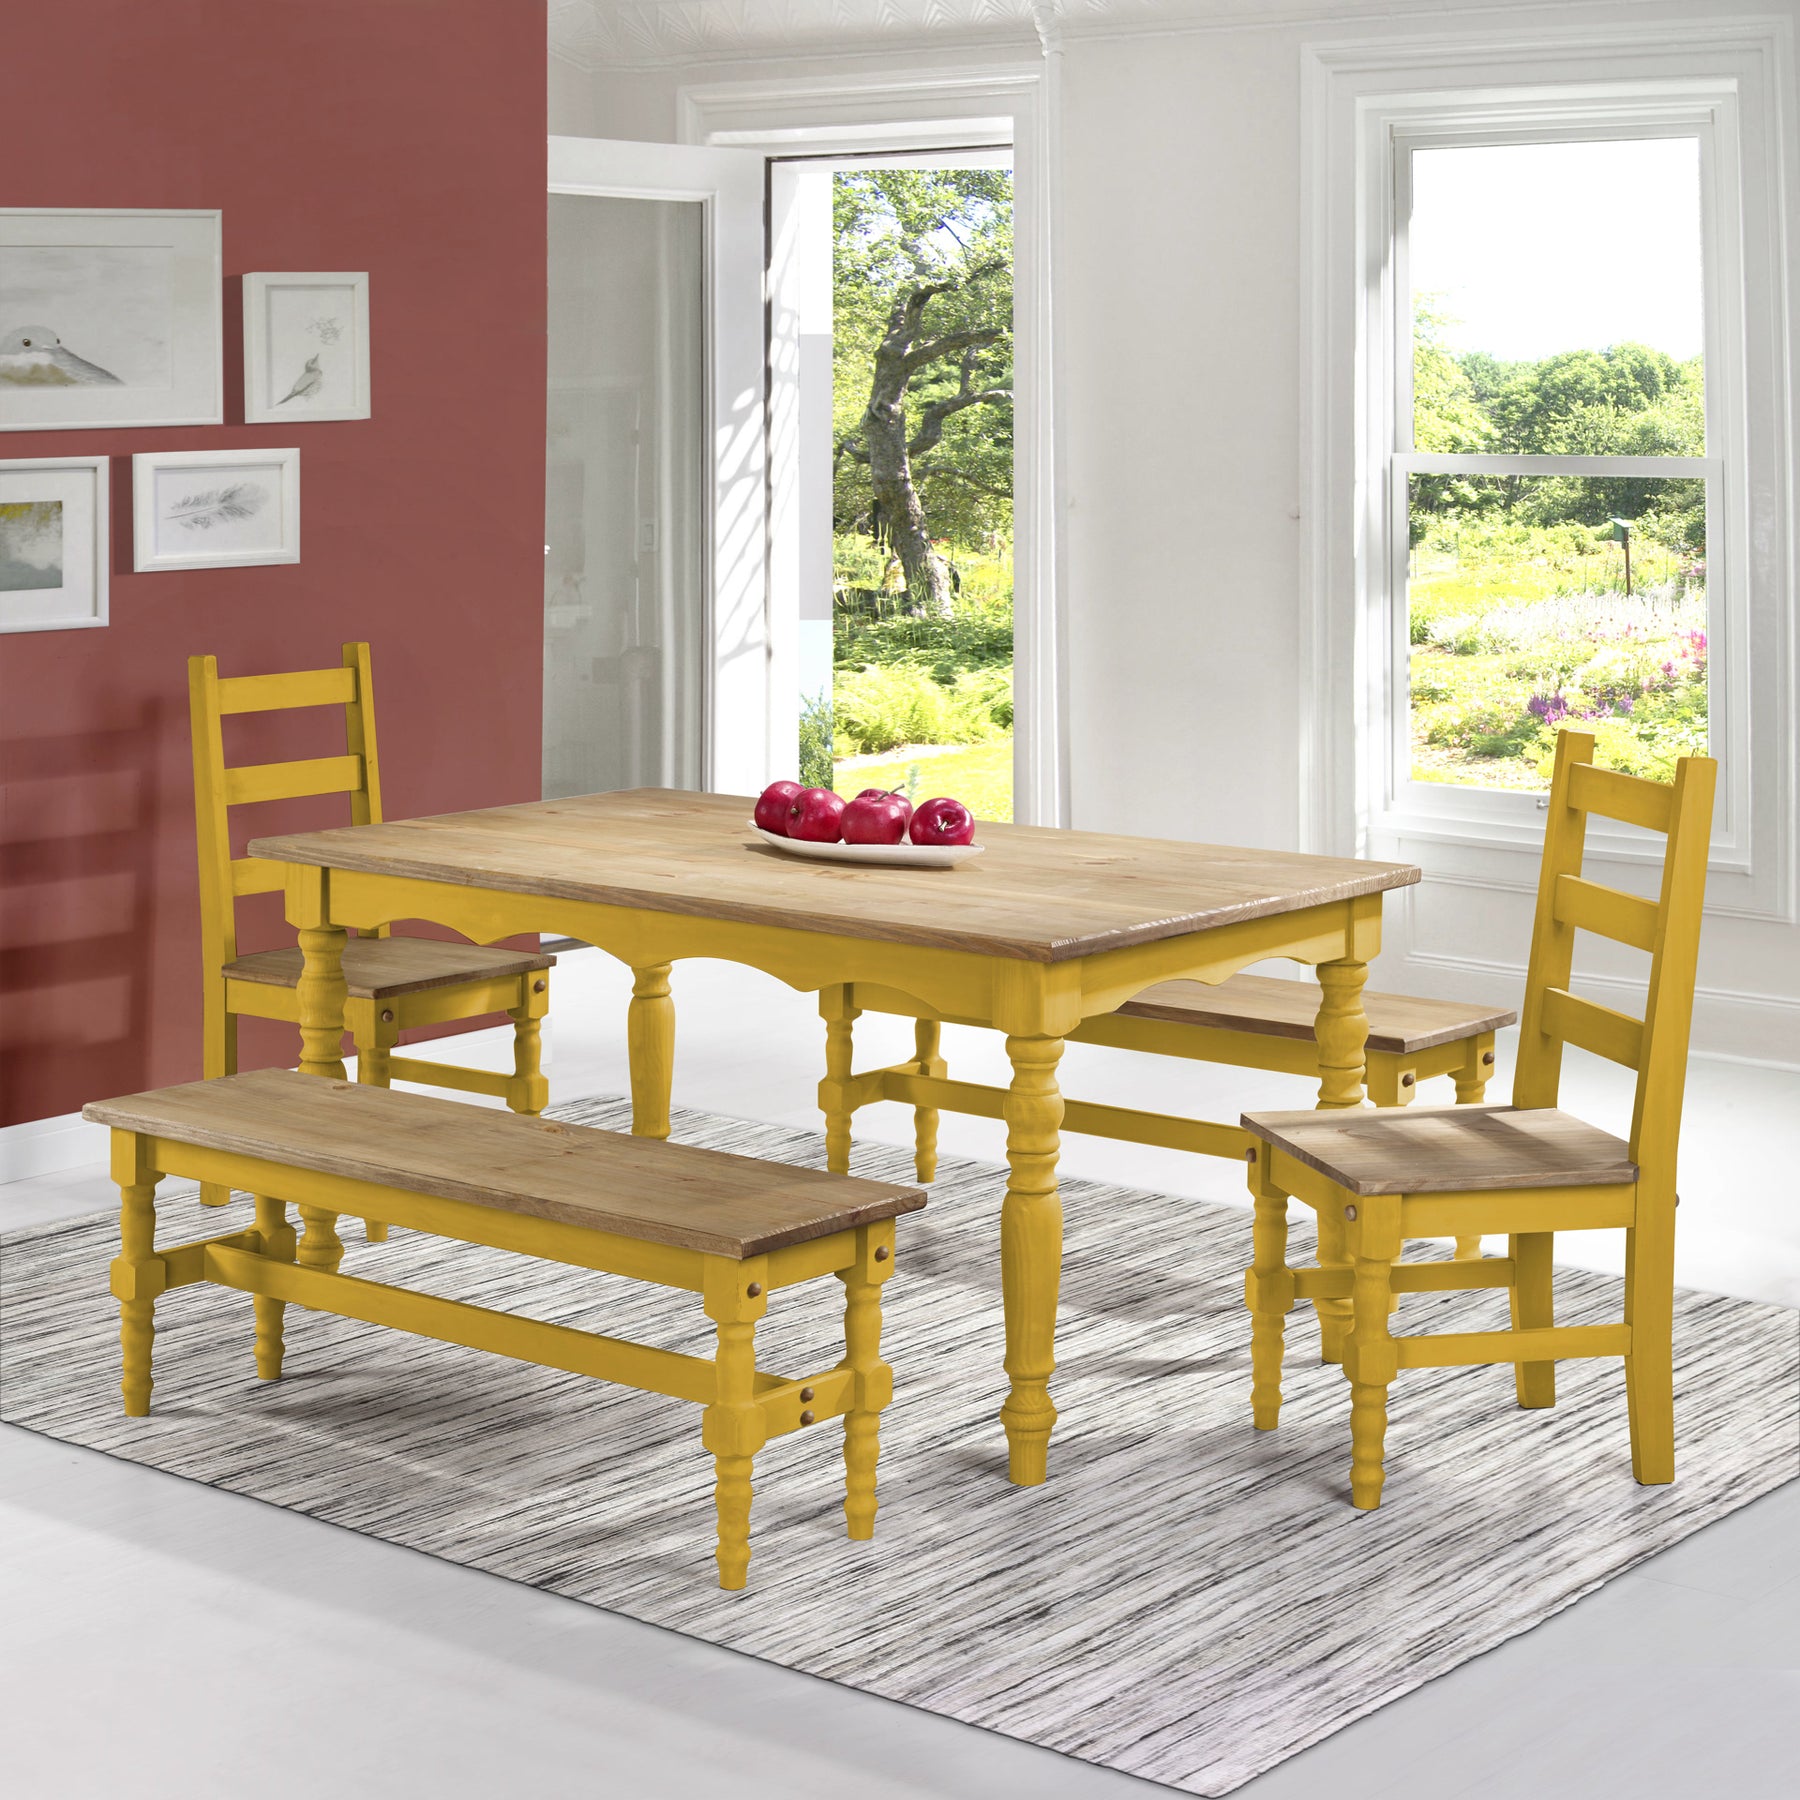 Manhattan Comfort Jay 5-Piece Solid Wood Dining Set with 2 Benches, 2 Chairs, and 1 Table in Yellow Wash-Minimal & Modern